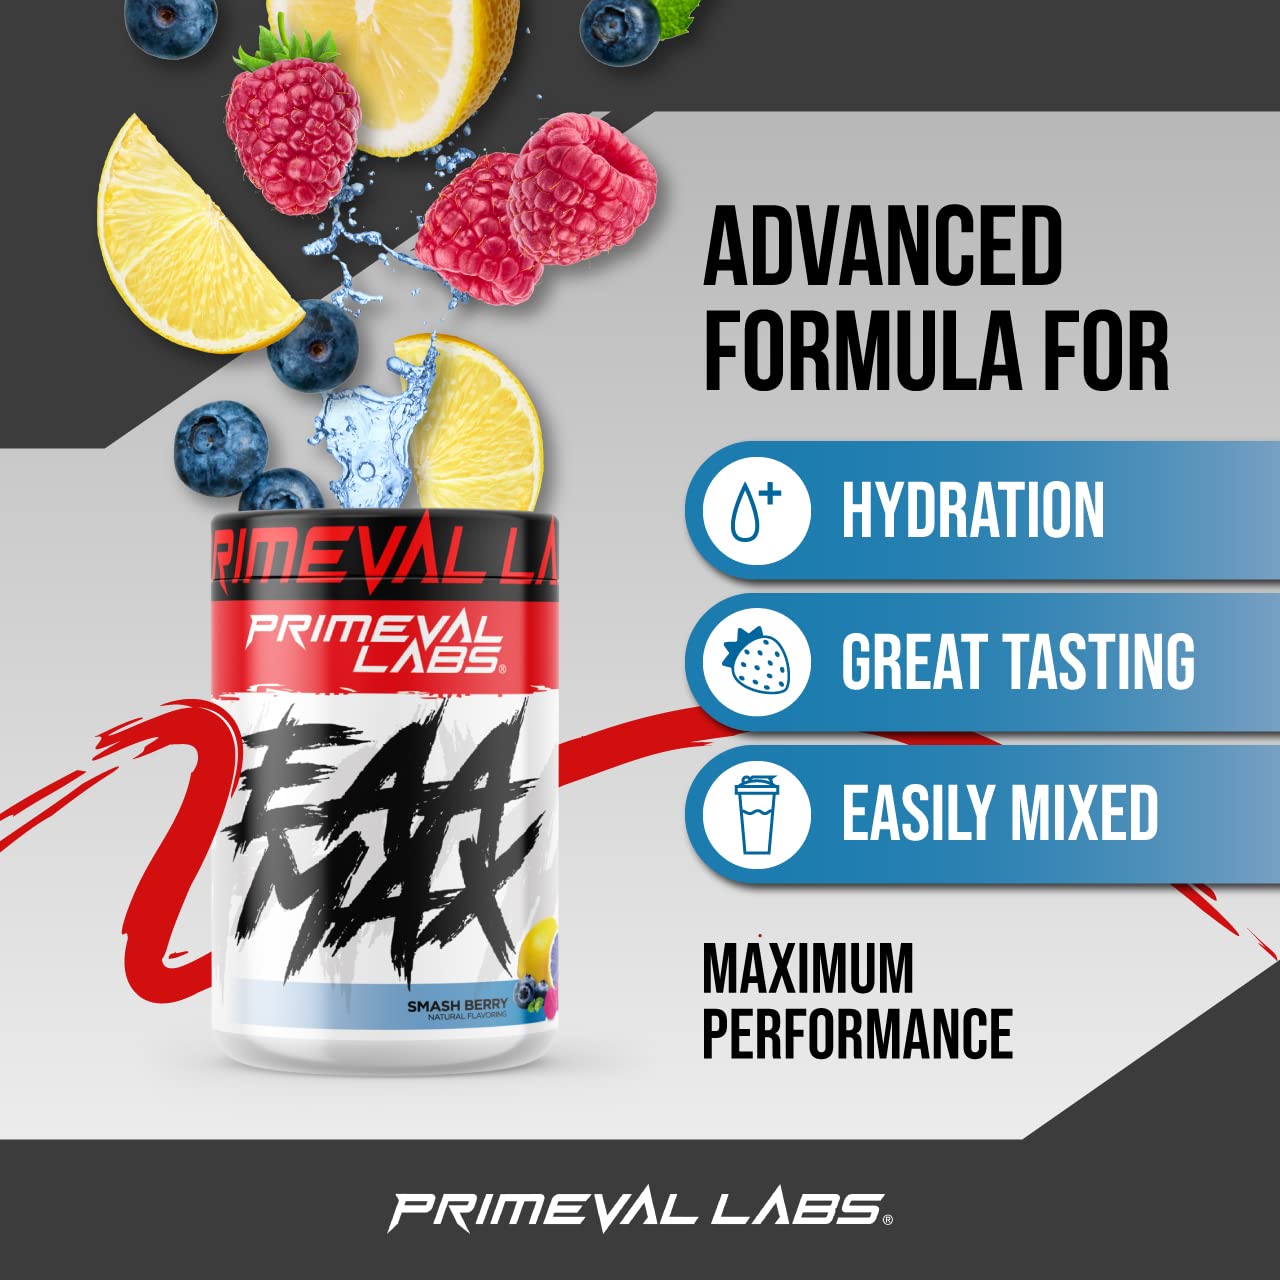 Primeval Labs EAA Max, BCAA Perfect Amino Acid Powder - Pre or Post Workout Muscle Recovery - BCAAs, EAAs, Electrolytes, Supports Hydration & Performance, Keto Friendly (Smashberry)